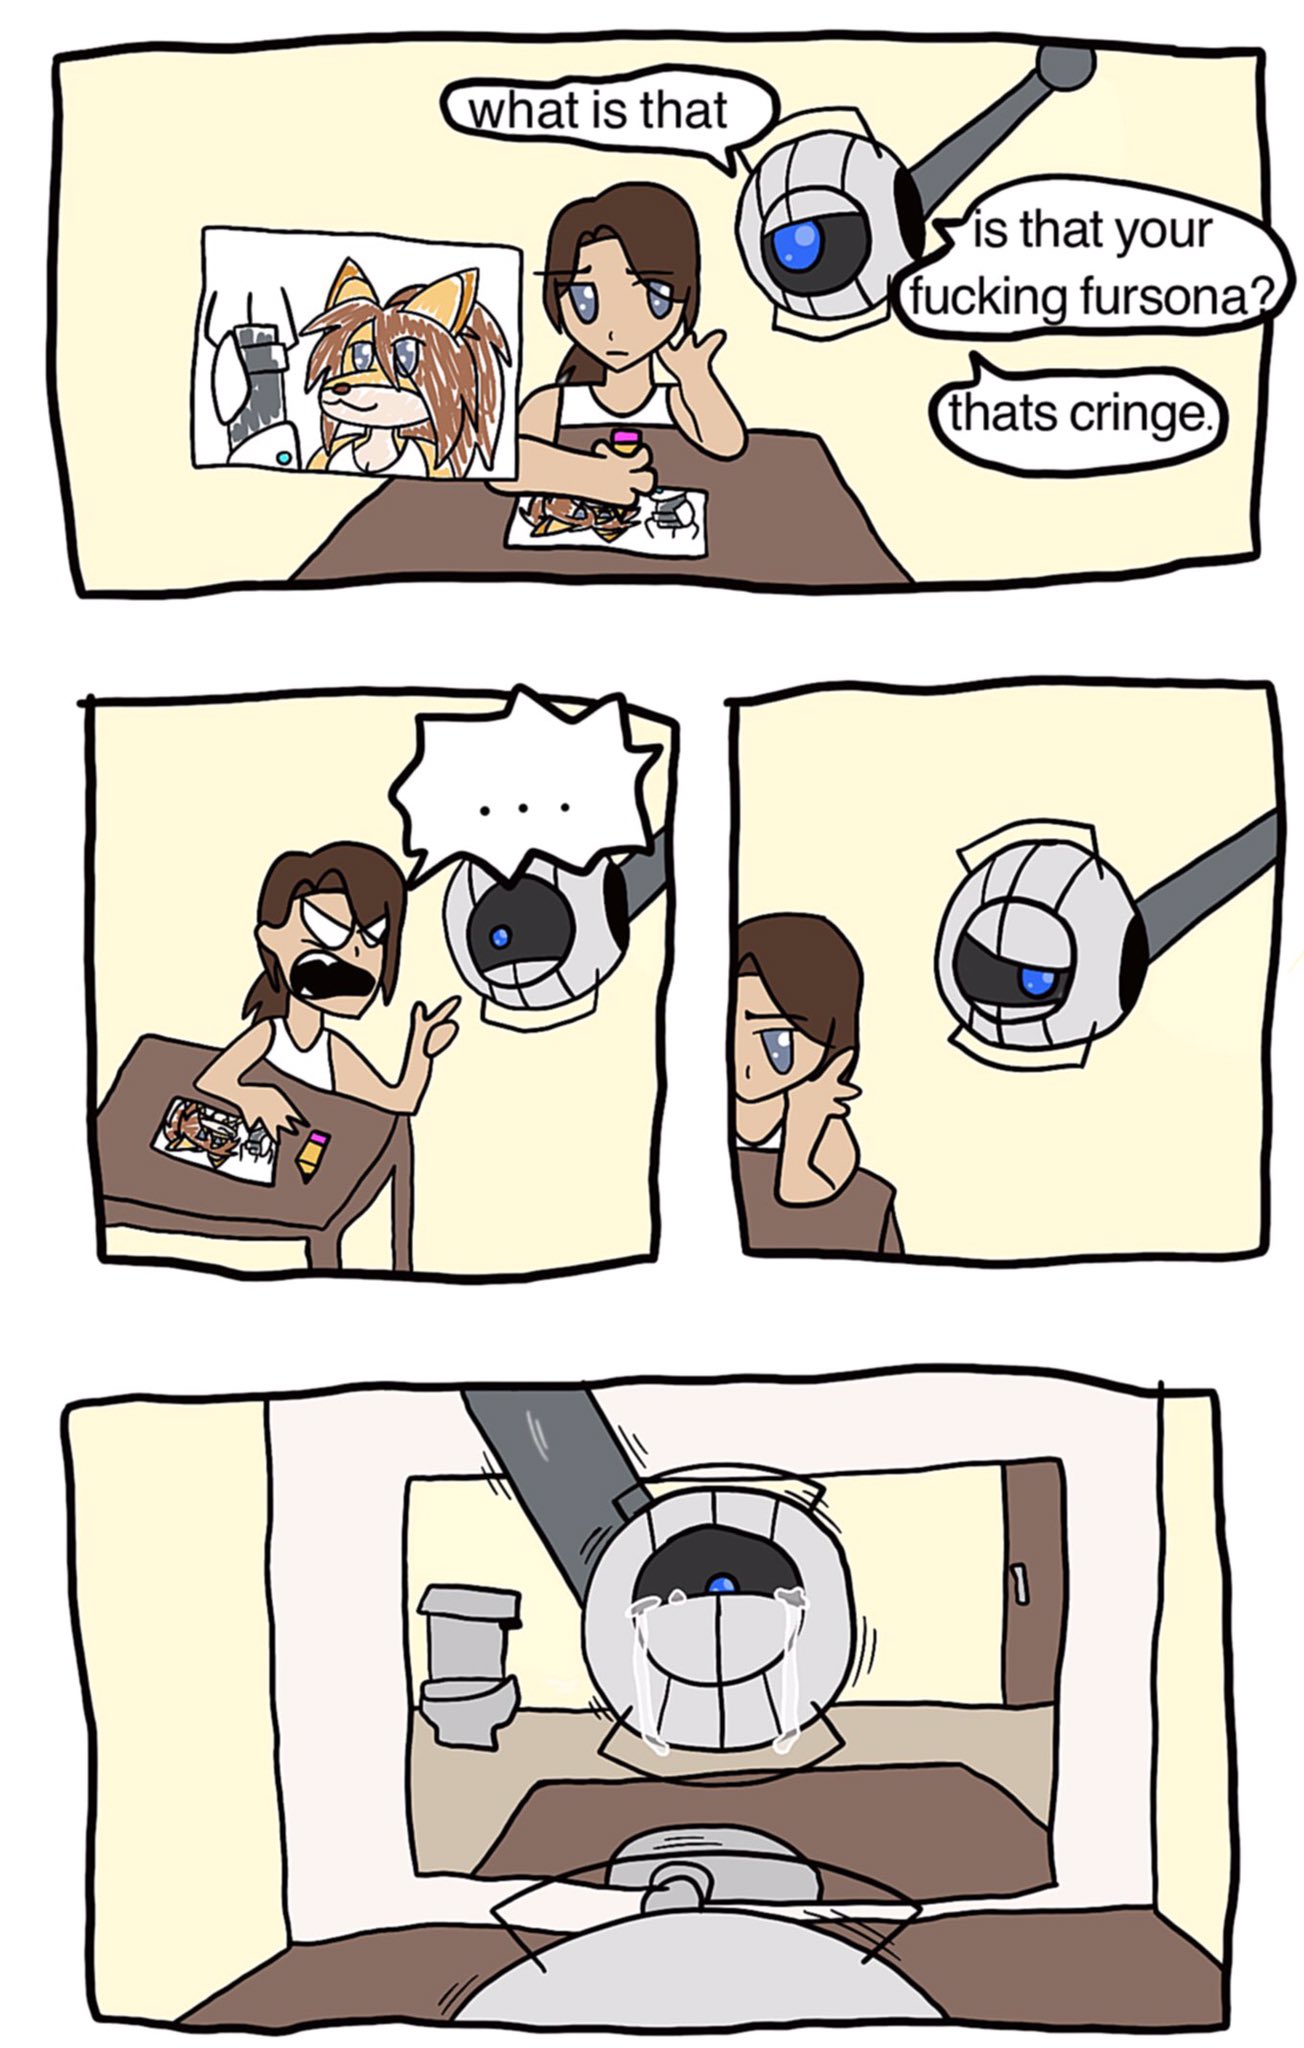 a poorly drawn comic of Wheatley and Chell, with Chell drawing her fursona: Wheatley: 'what is that is that your fucking fursona fucking cringe' Chell: '...' This upsets Wheatley so much he goes to cry in the bathroom mirror